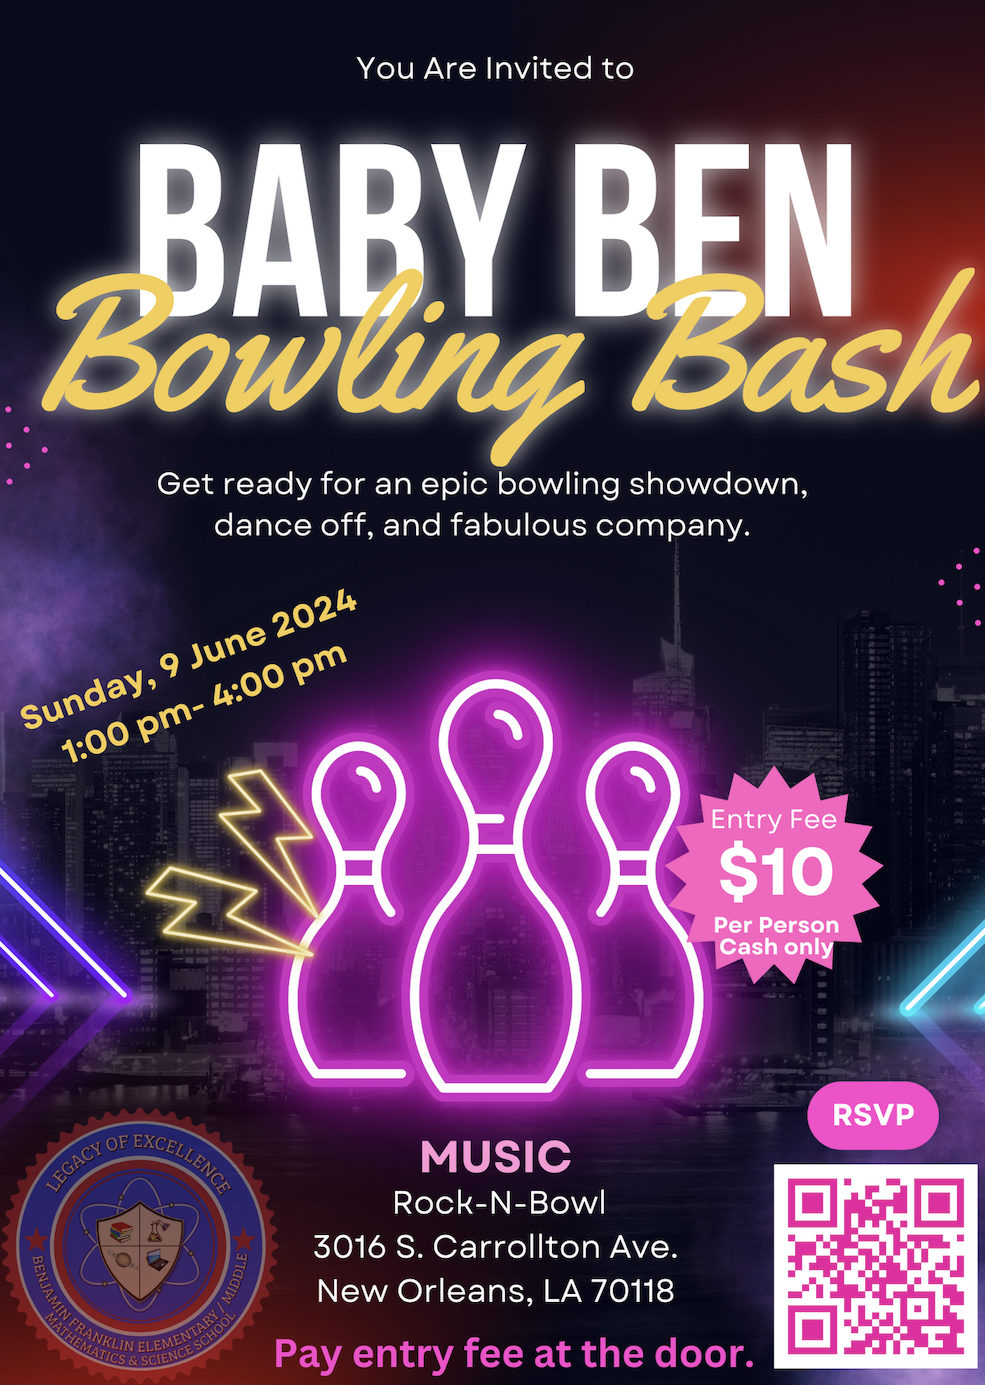 MUSIC Rock-N-Bowl 3016 S. Carrollton Ave. New Orleans, LA 70118 Pay entry fee at the door.